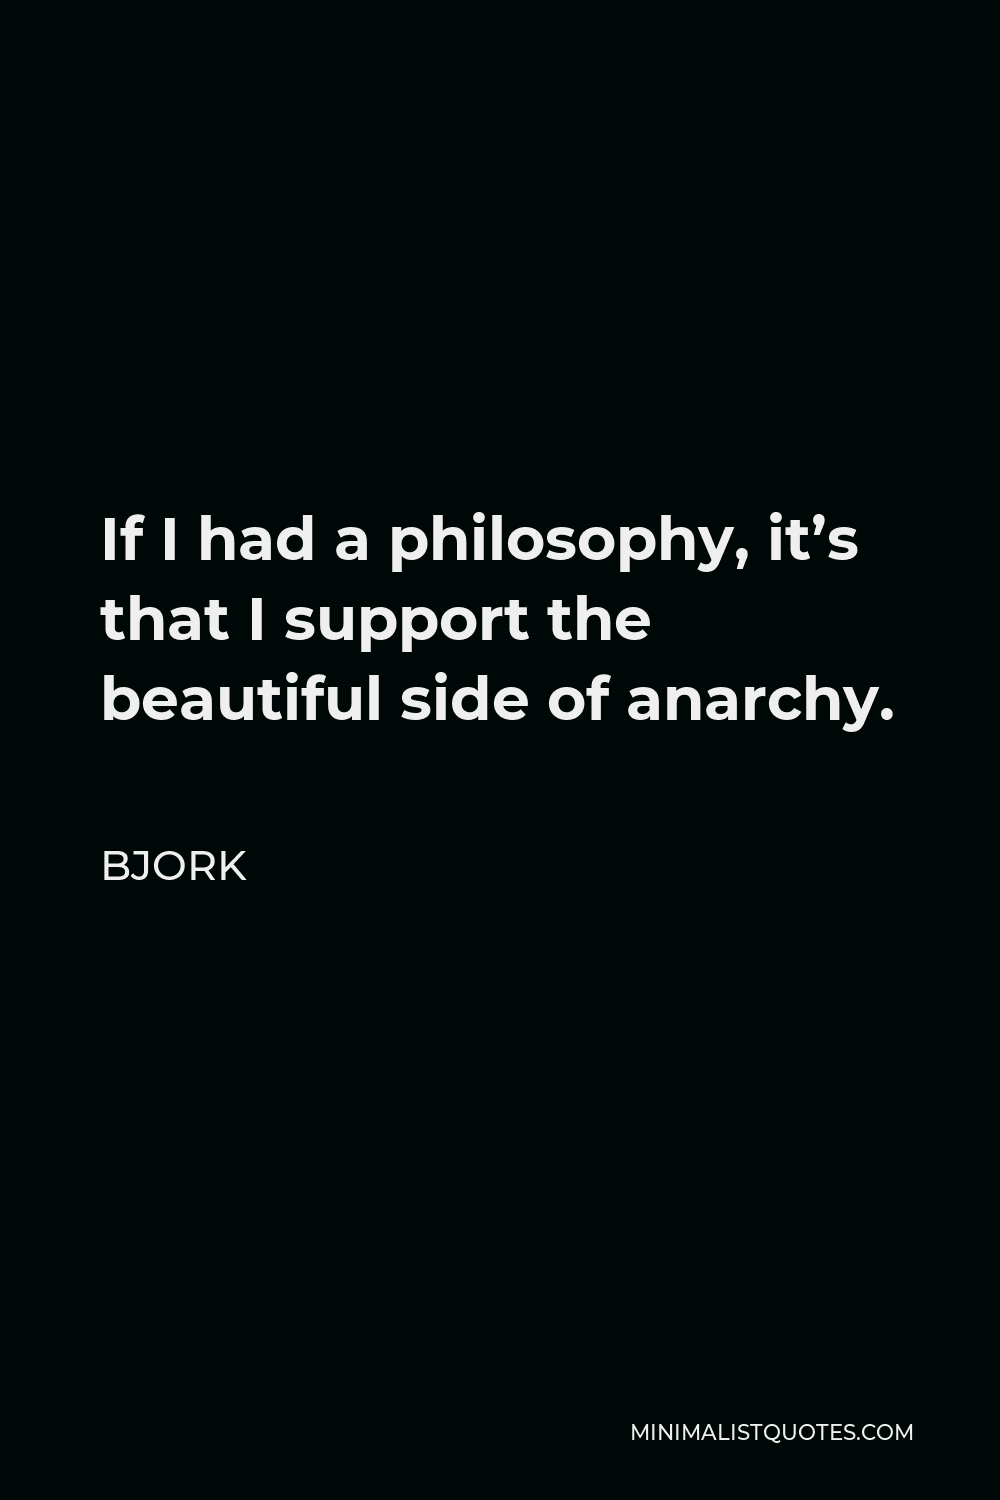 Bjork Quote - If I had a philosophy, it’s that I support the beautiful side of anarchy.